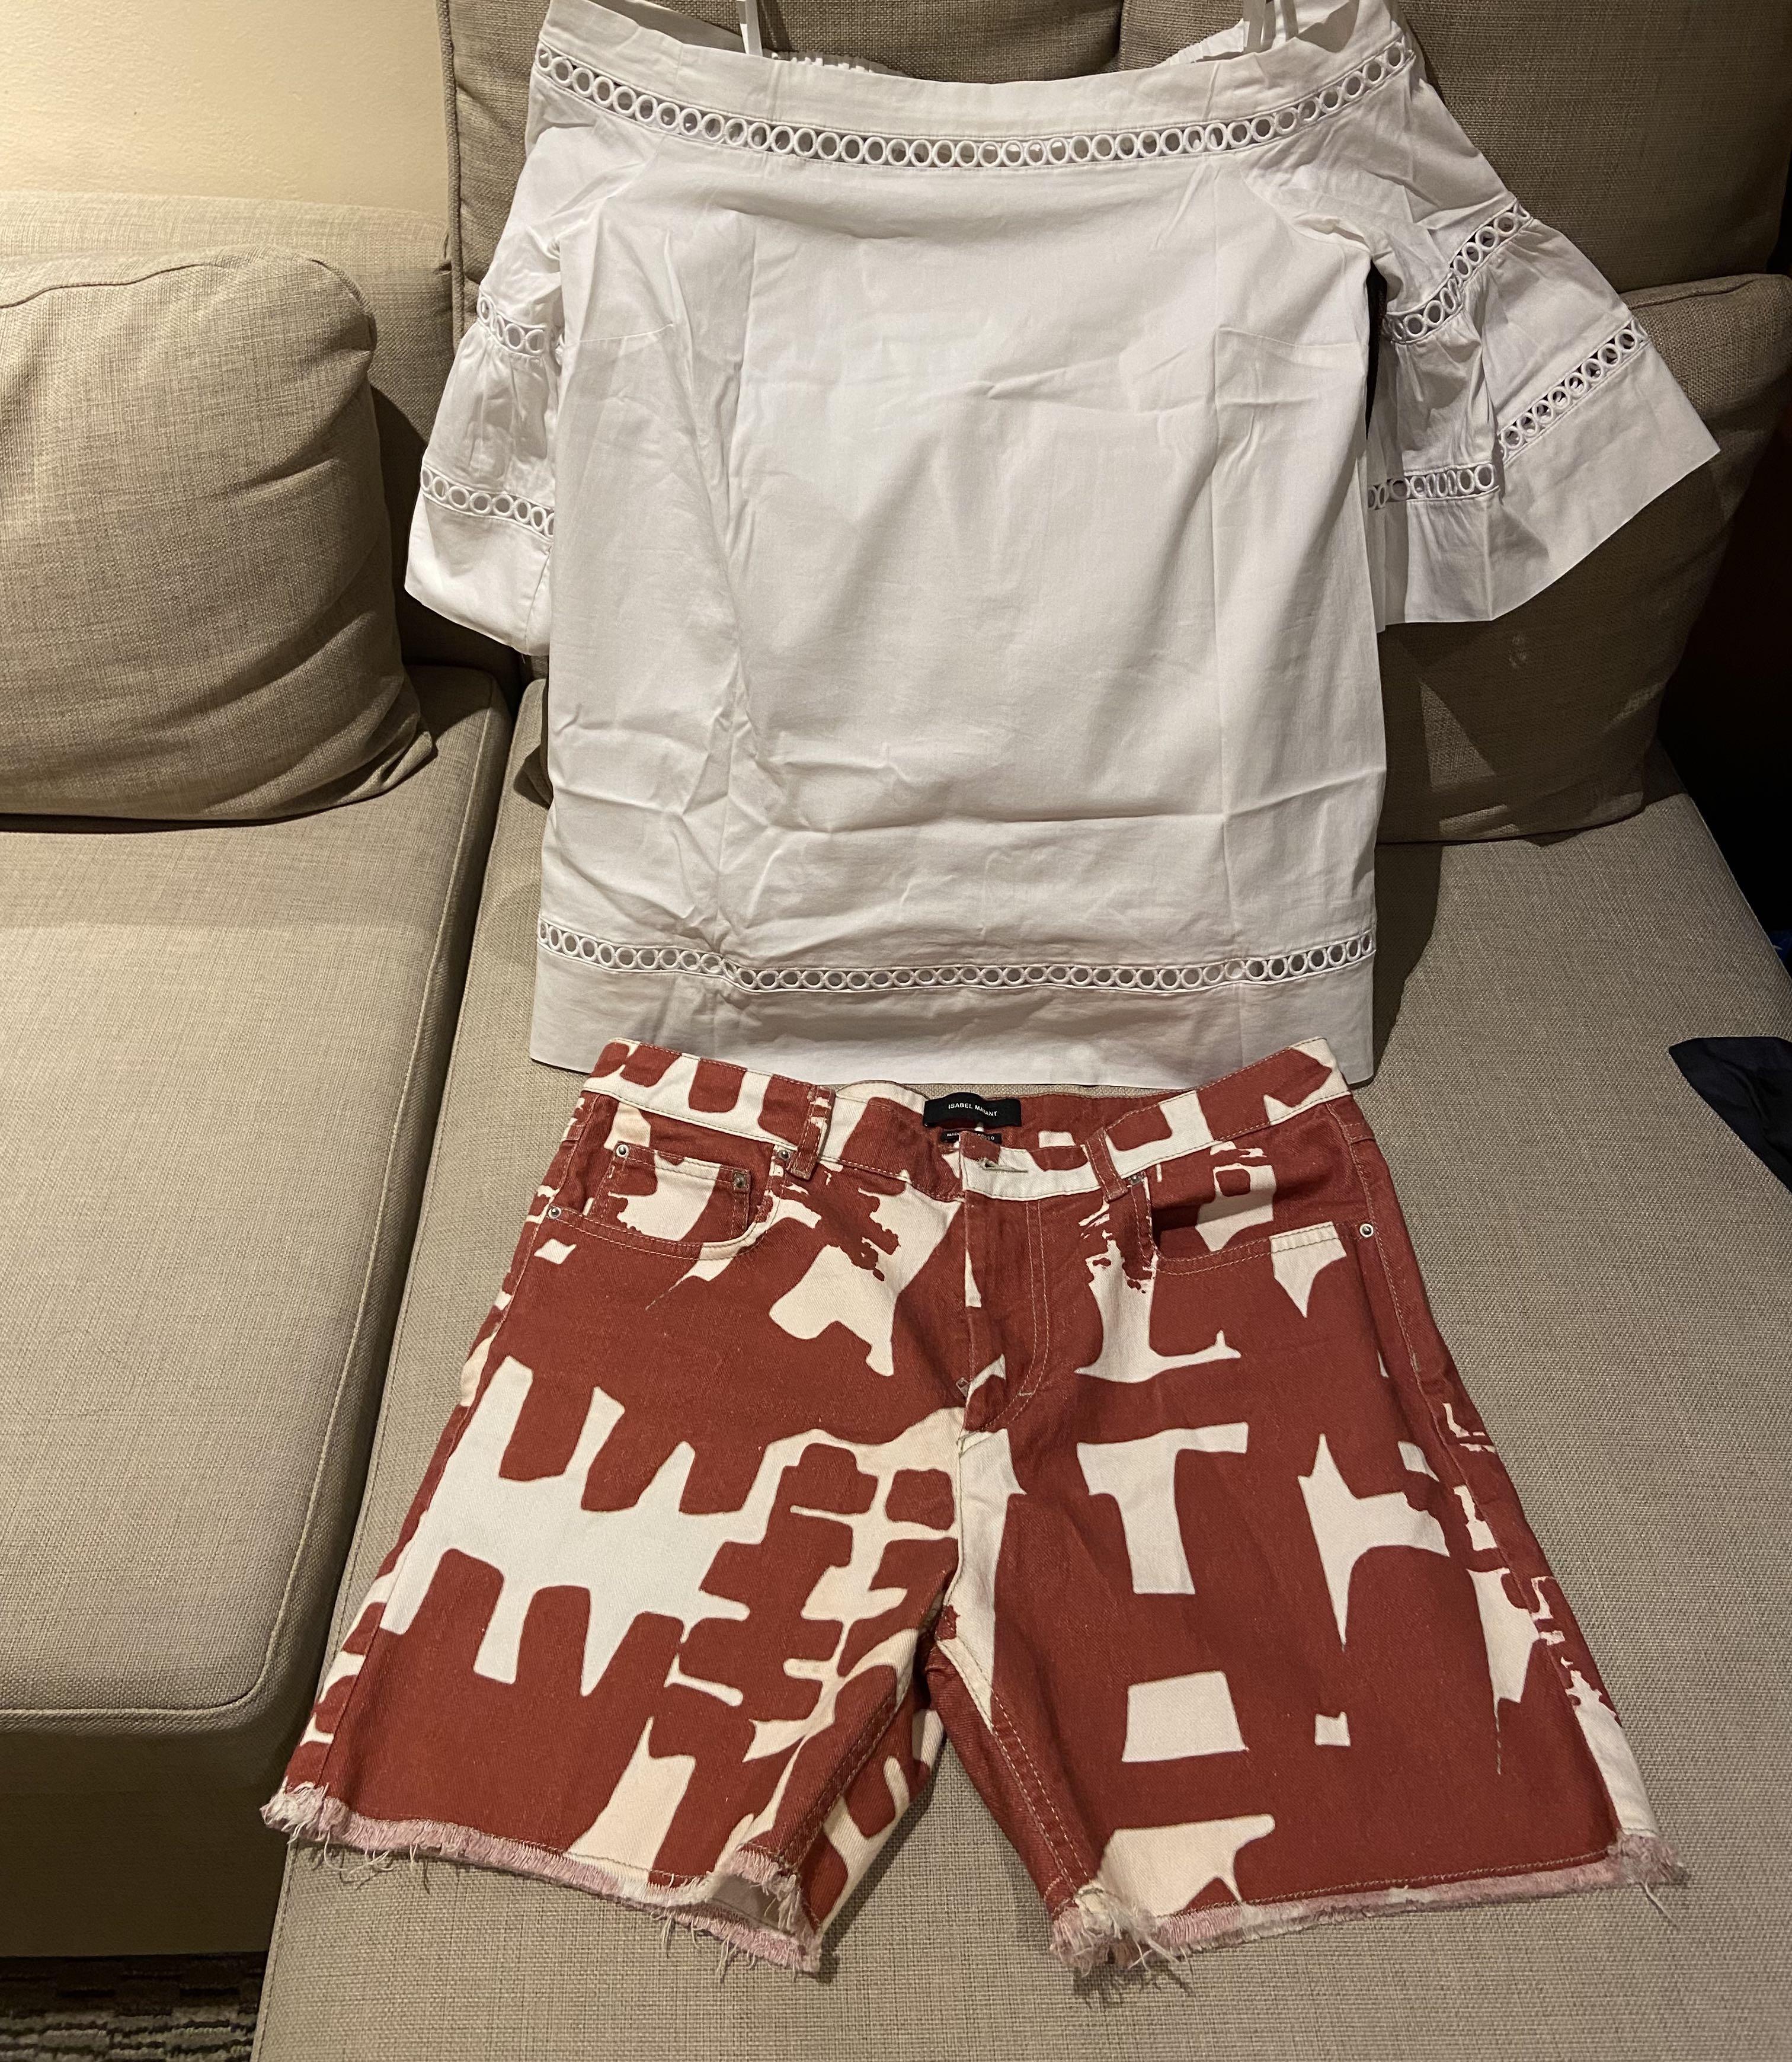 1 set Italy brand Isabel Marant shorts and Michael Kors white top, Women's Fashion, Dresses & Sets, or Coordinates on Carousell